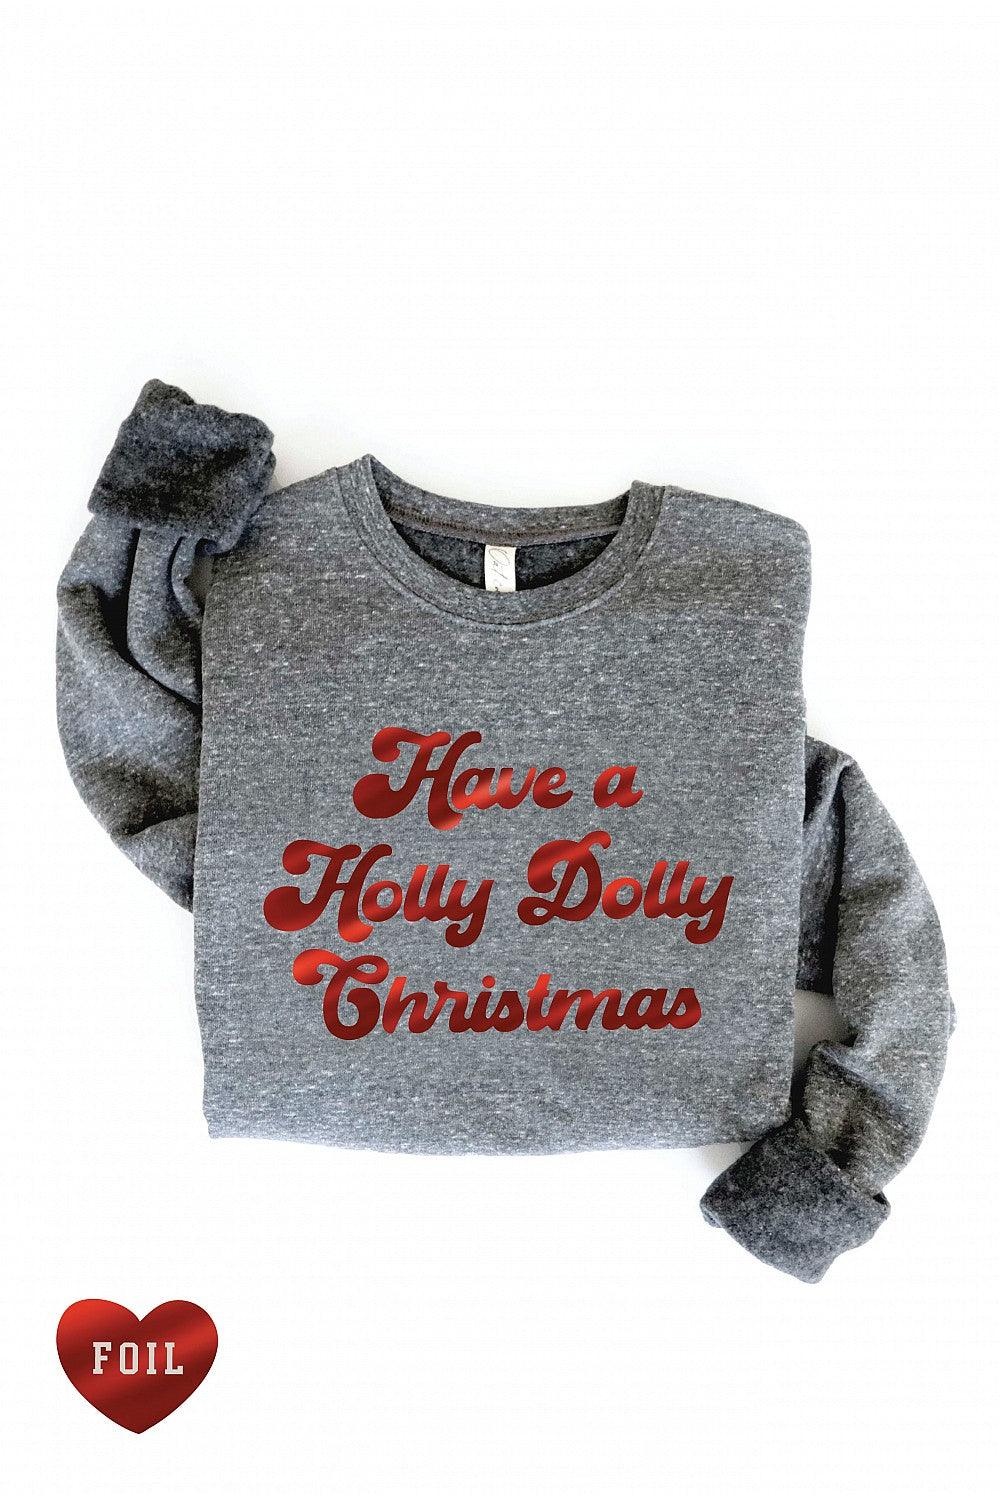 HAVE A HOLLY DOLLY CHRISTMAS PULLOVER , graphic pulllover , It's NOMB , christmas graphics, COZY GRAPHIC PULLOVER, COZY GRAPHIC SWEATSHIRT, graphic sweatshirt, HAVE A HOLLY DOLLY CHRISTMAS SWEATSHIRT, SWEATSHIRTS , It's NOMB , itsnomb.com